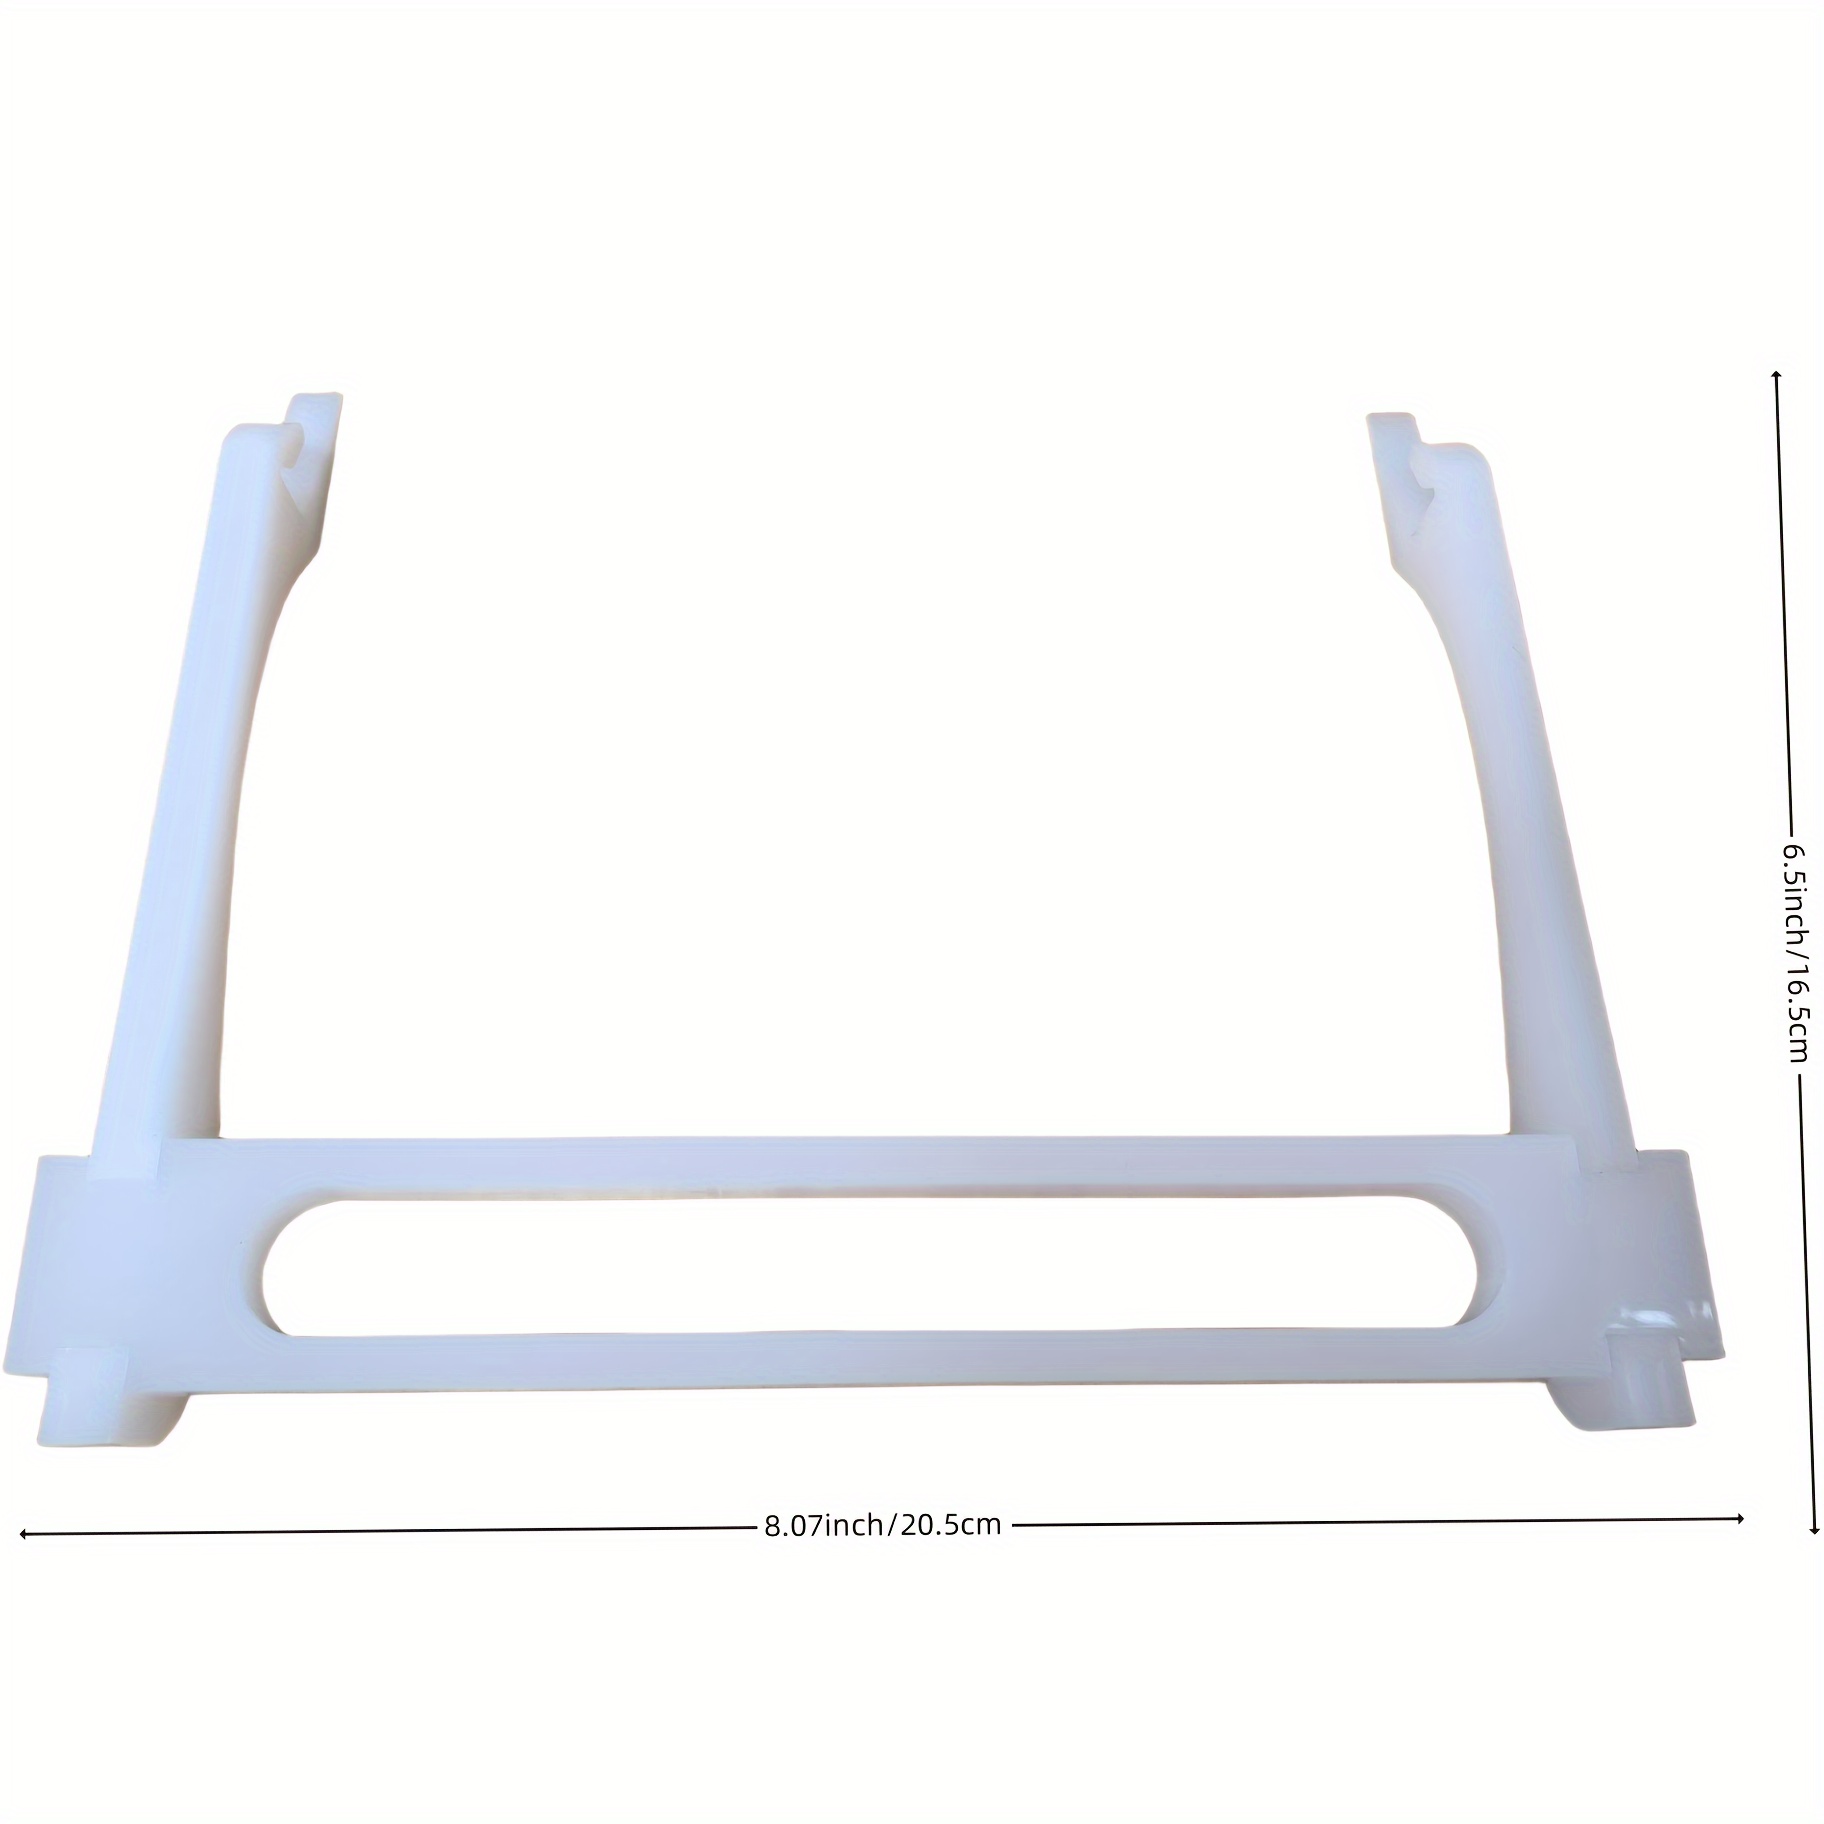 Extension Tray Compatible with Cricut Maker 3/Explore 3/Air 2